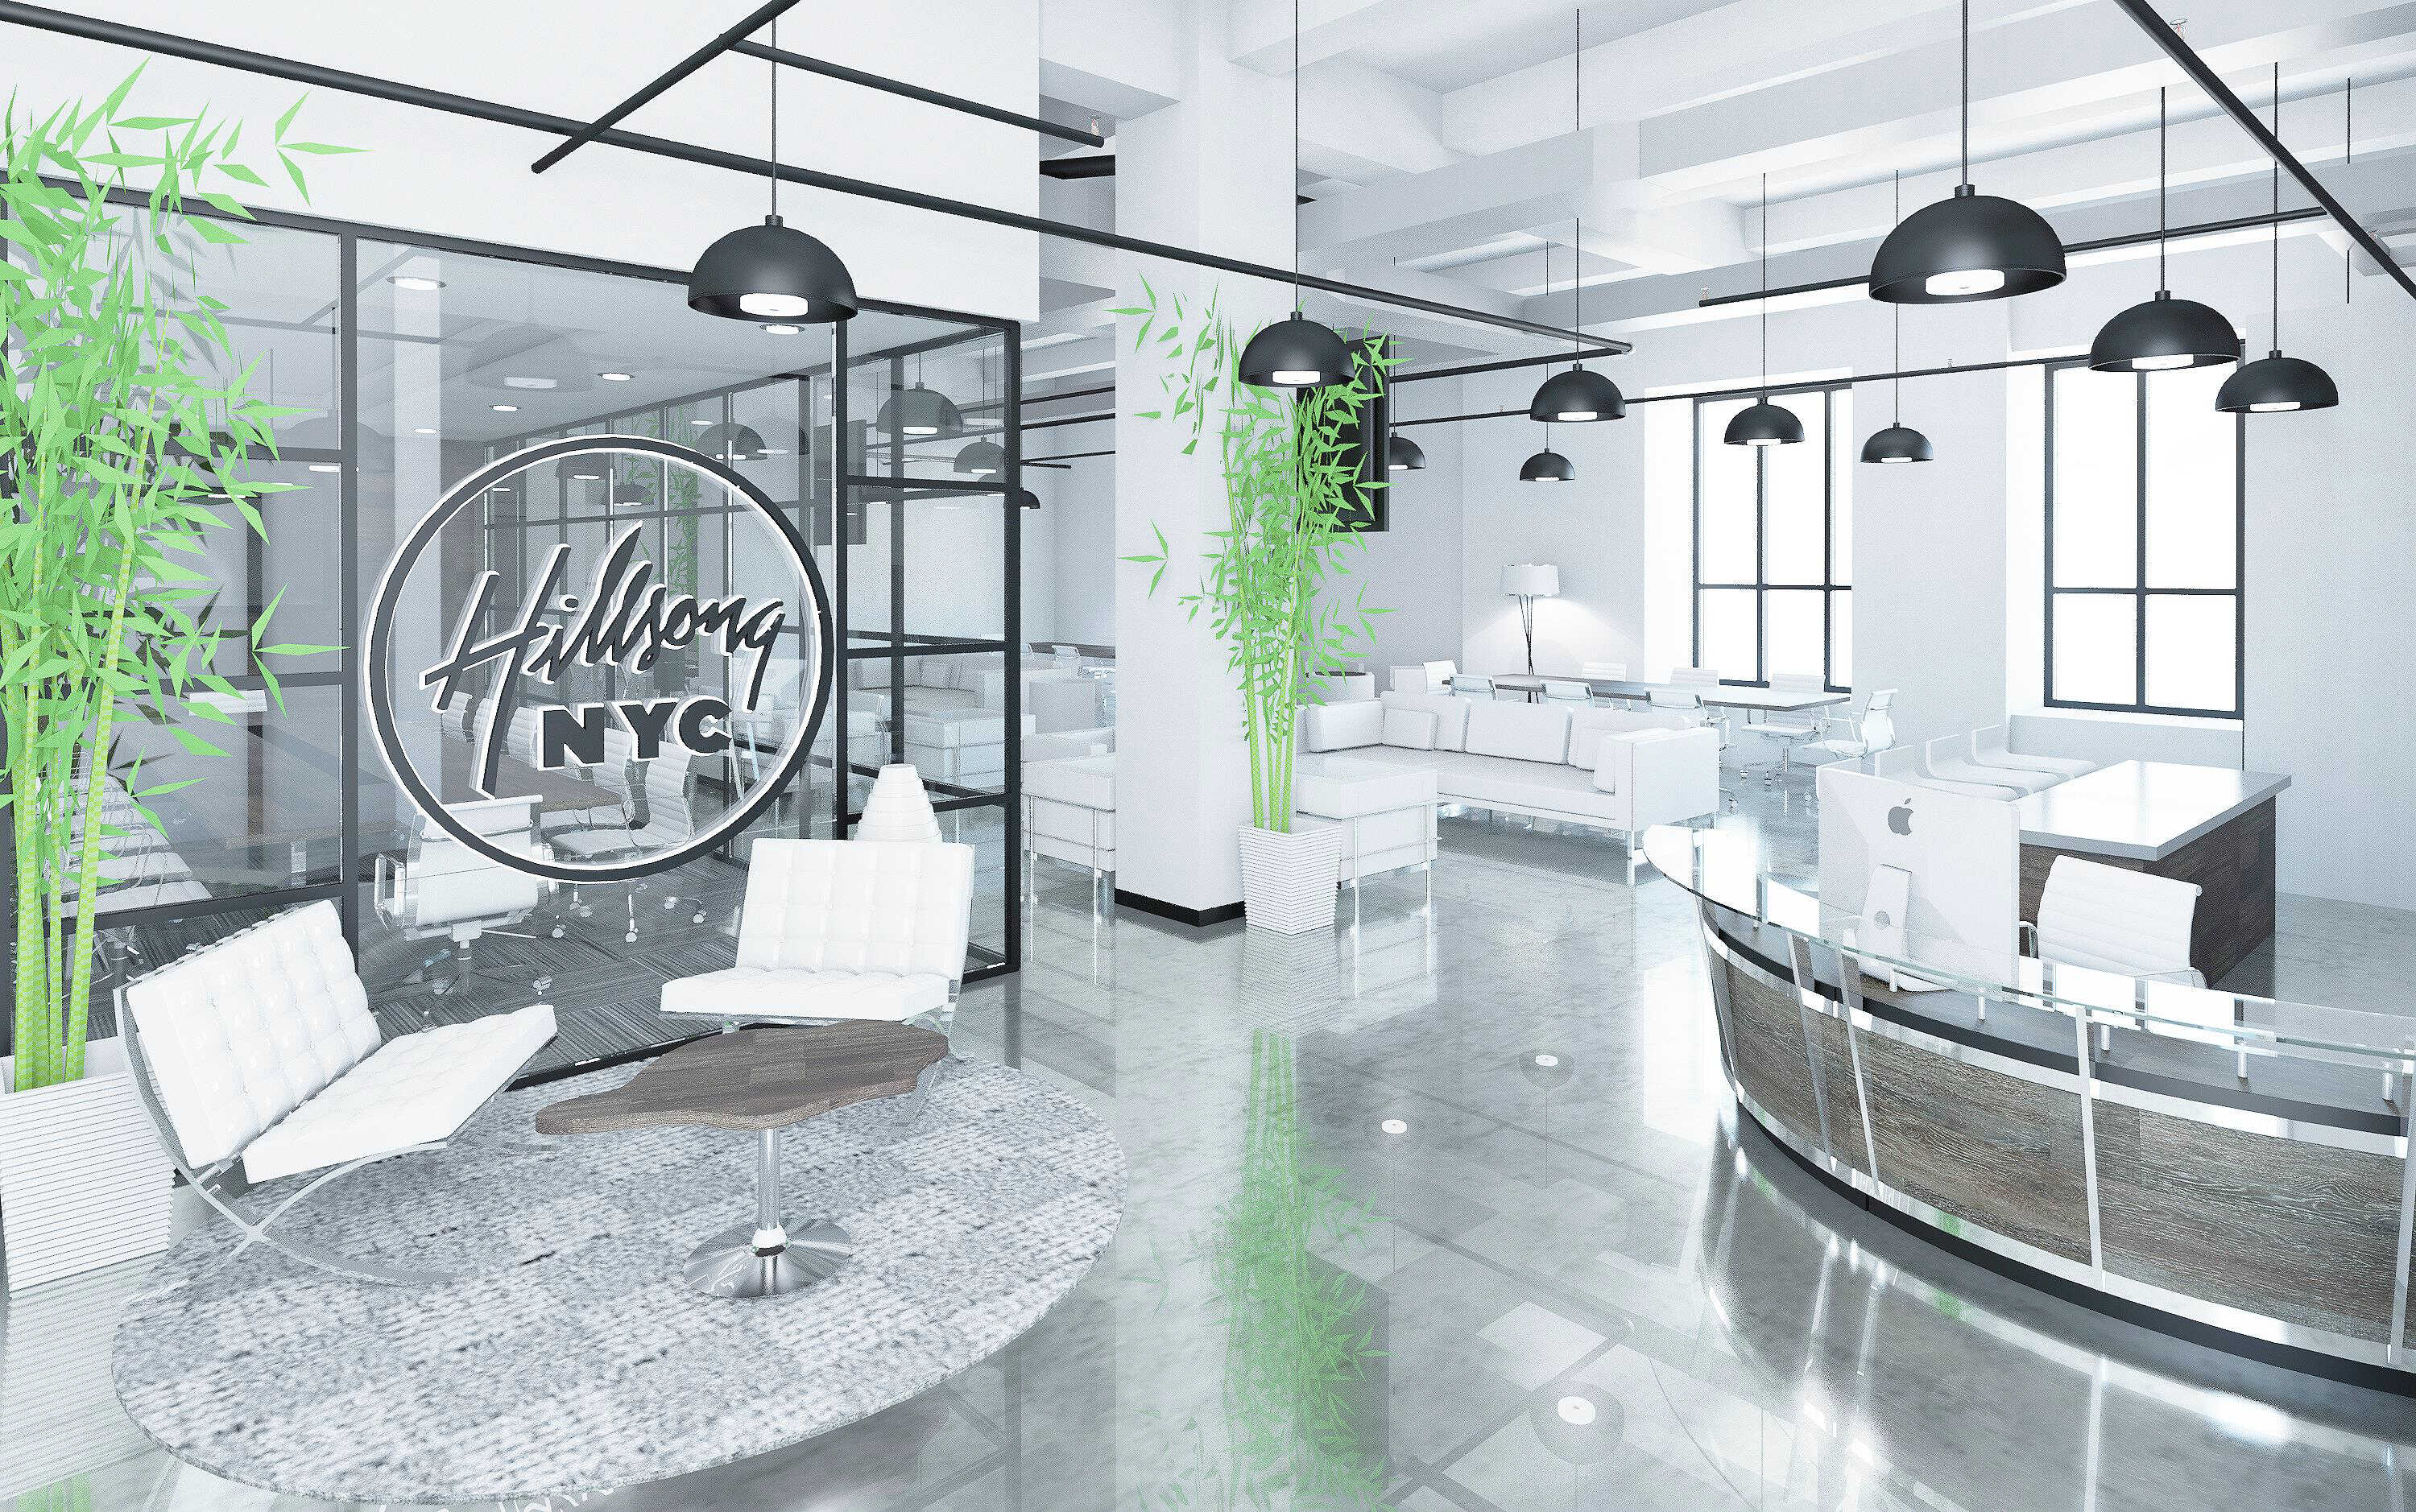 Hillsong NYC Lobby Office Space Constructability Detailed Analysis & Design